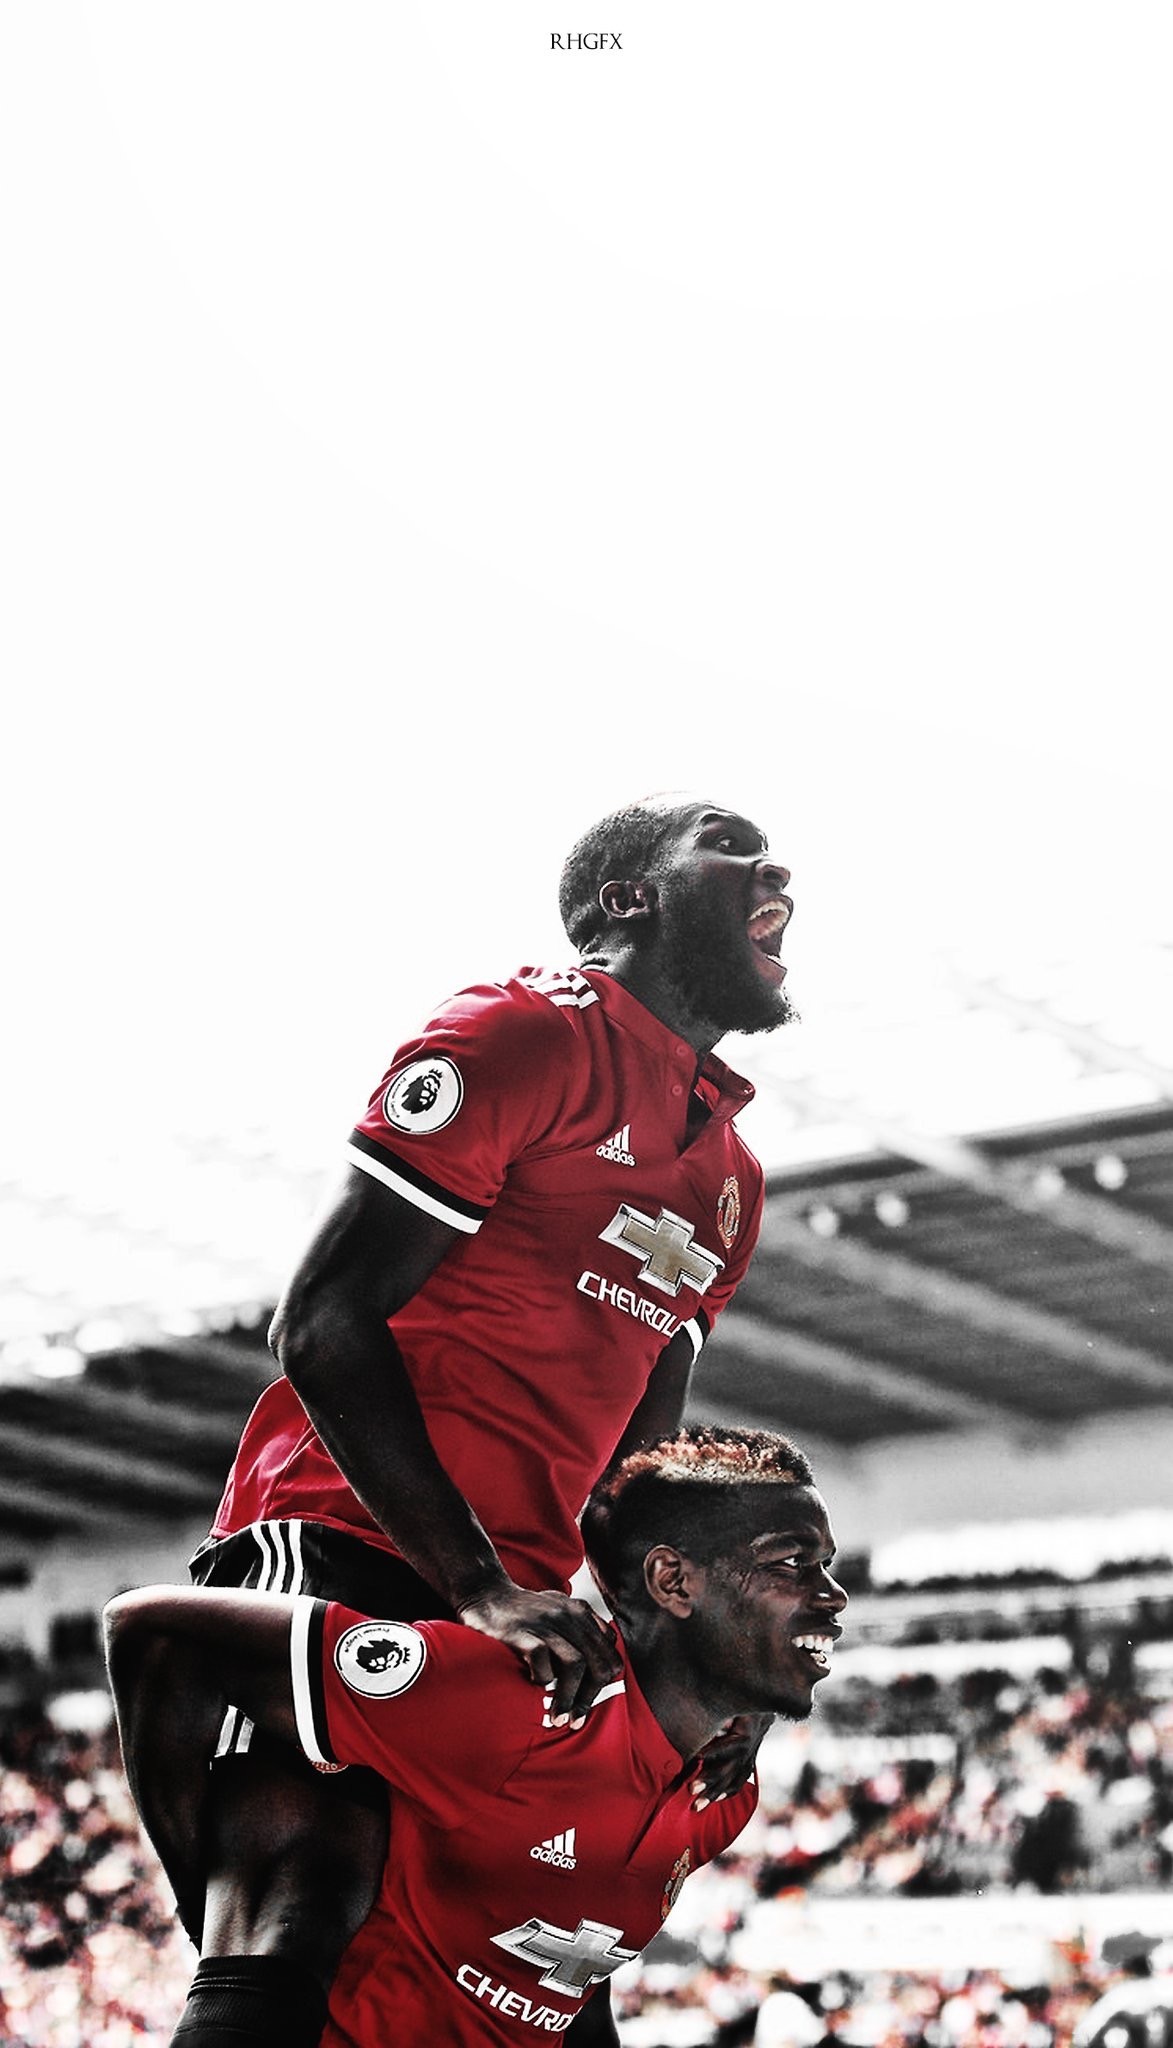 wallpaper manchester united terbaru,team sport,competition event,player,team,personal protective equipment